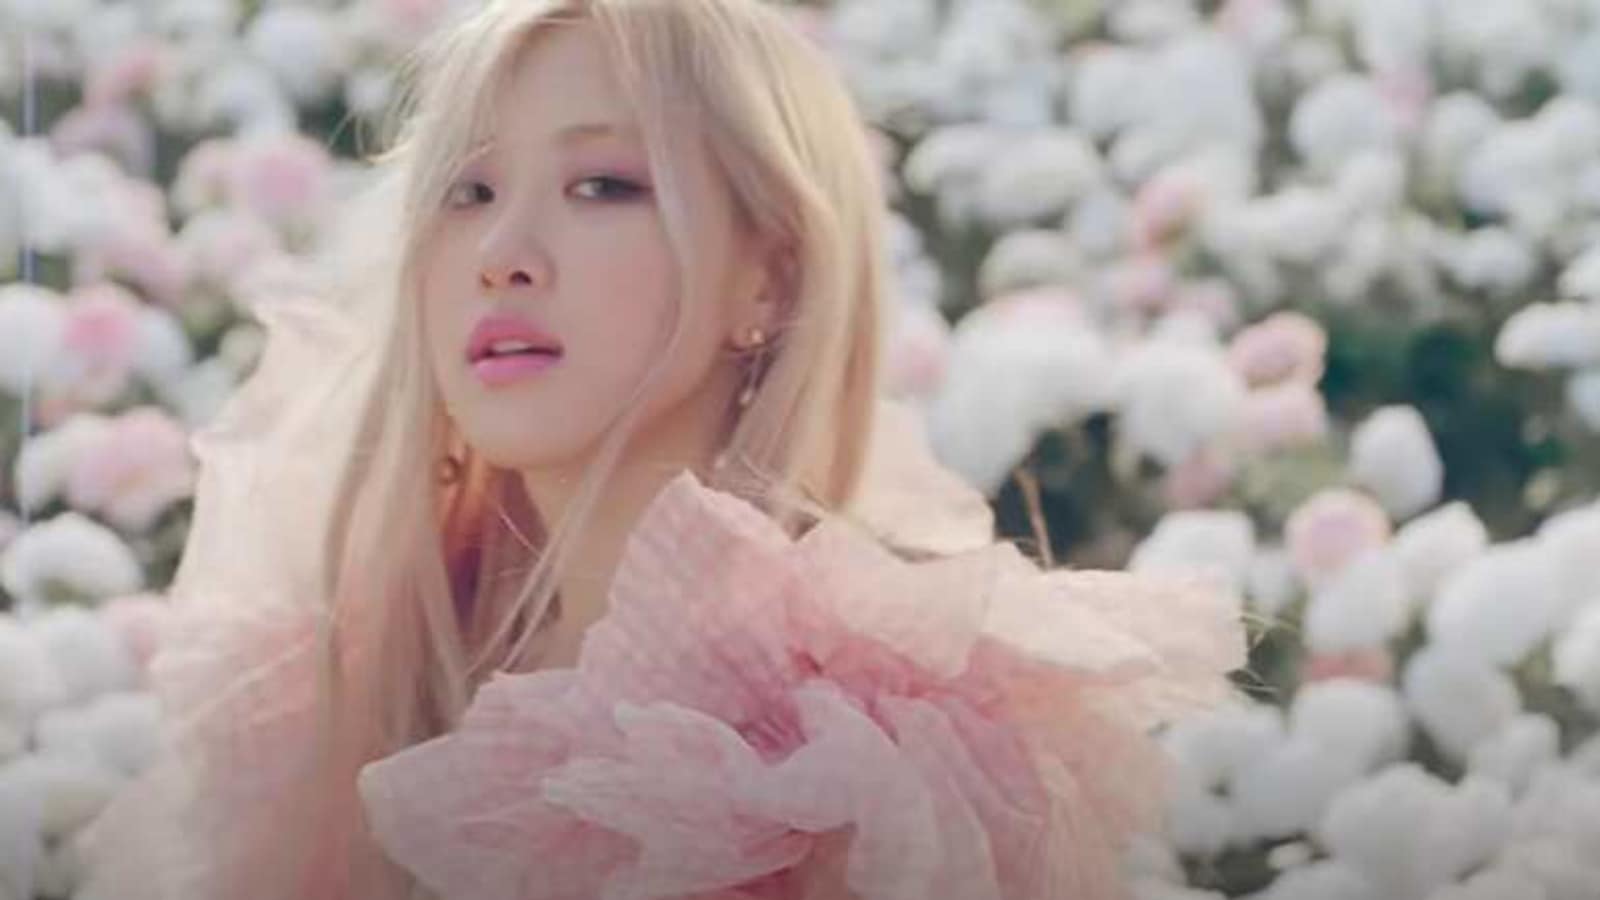 On The Ground Mv Blackpink Member Rosé Makes Her Solo Debut With Stunning Video Jisoo Showers